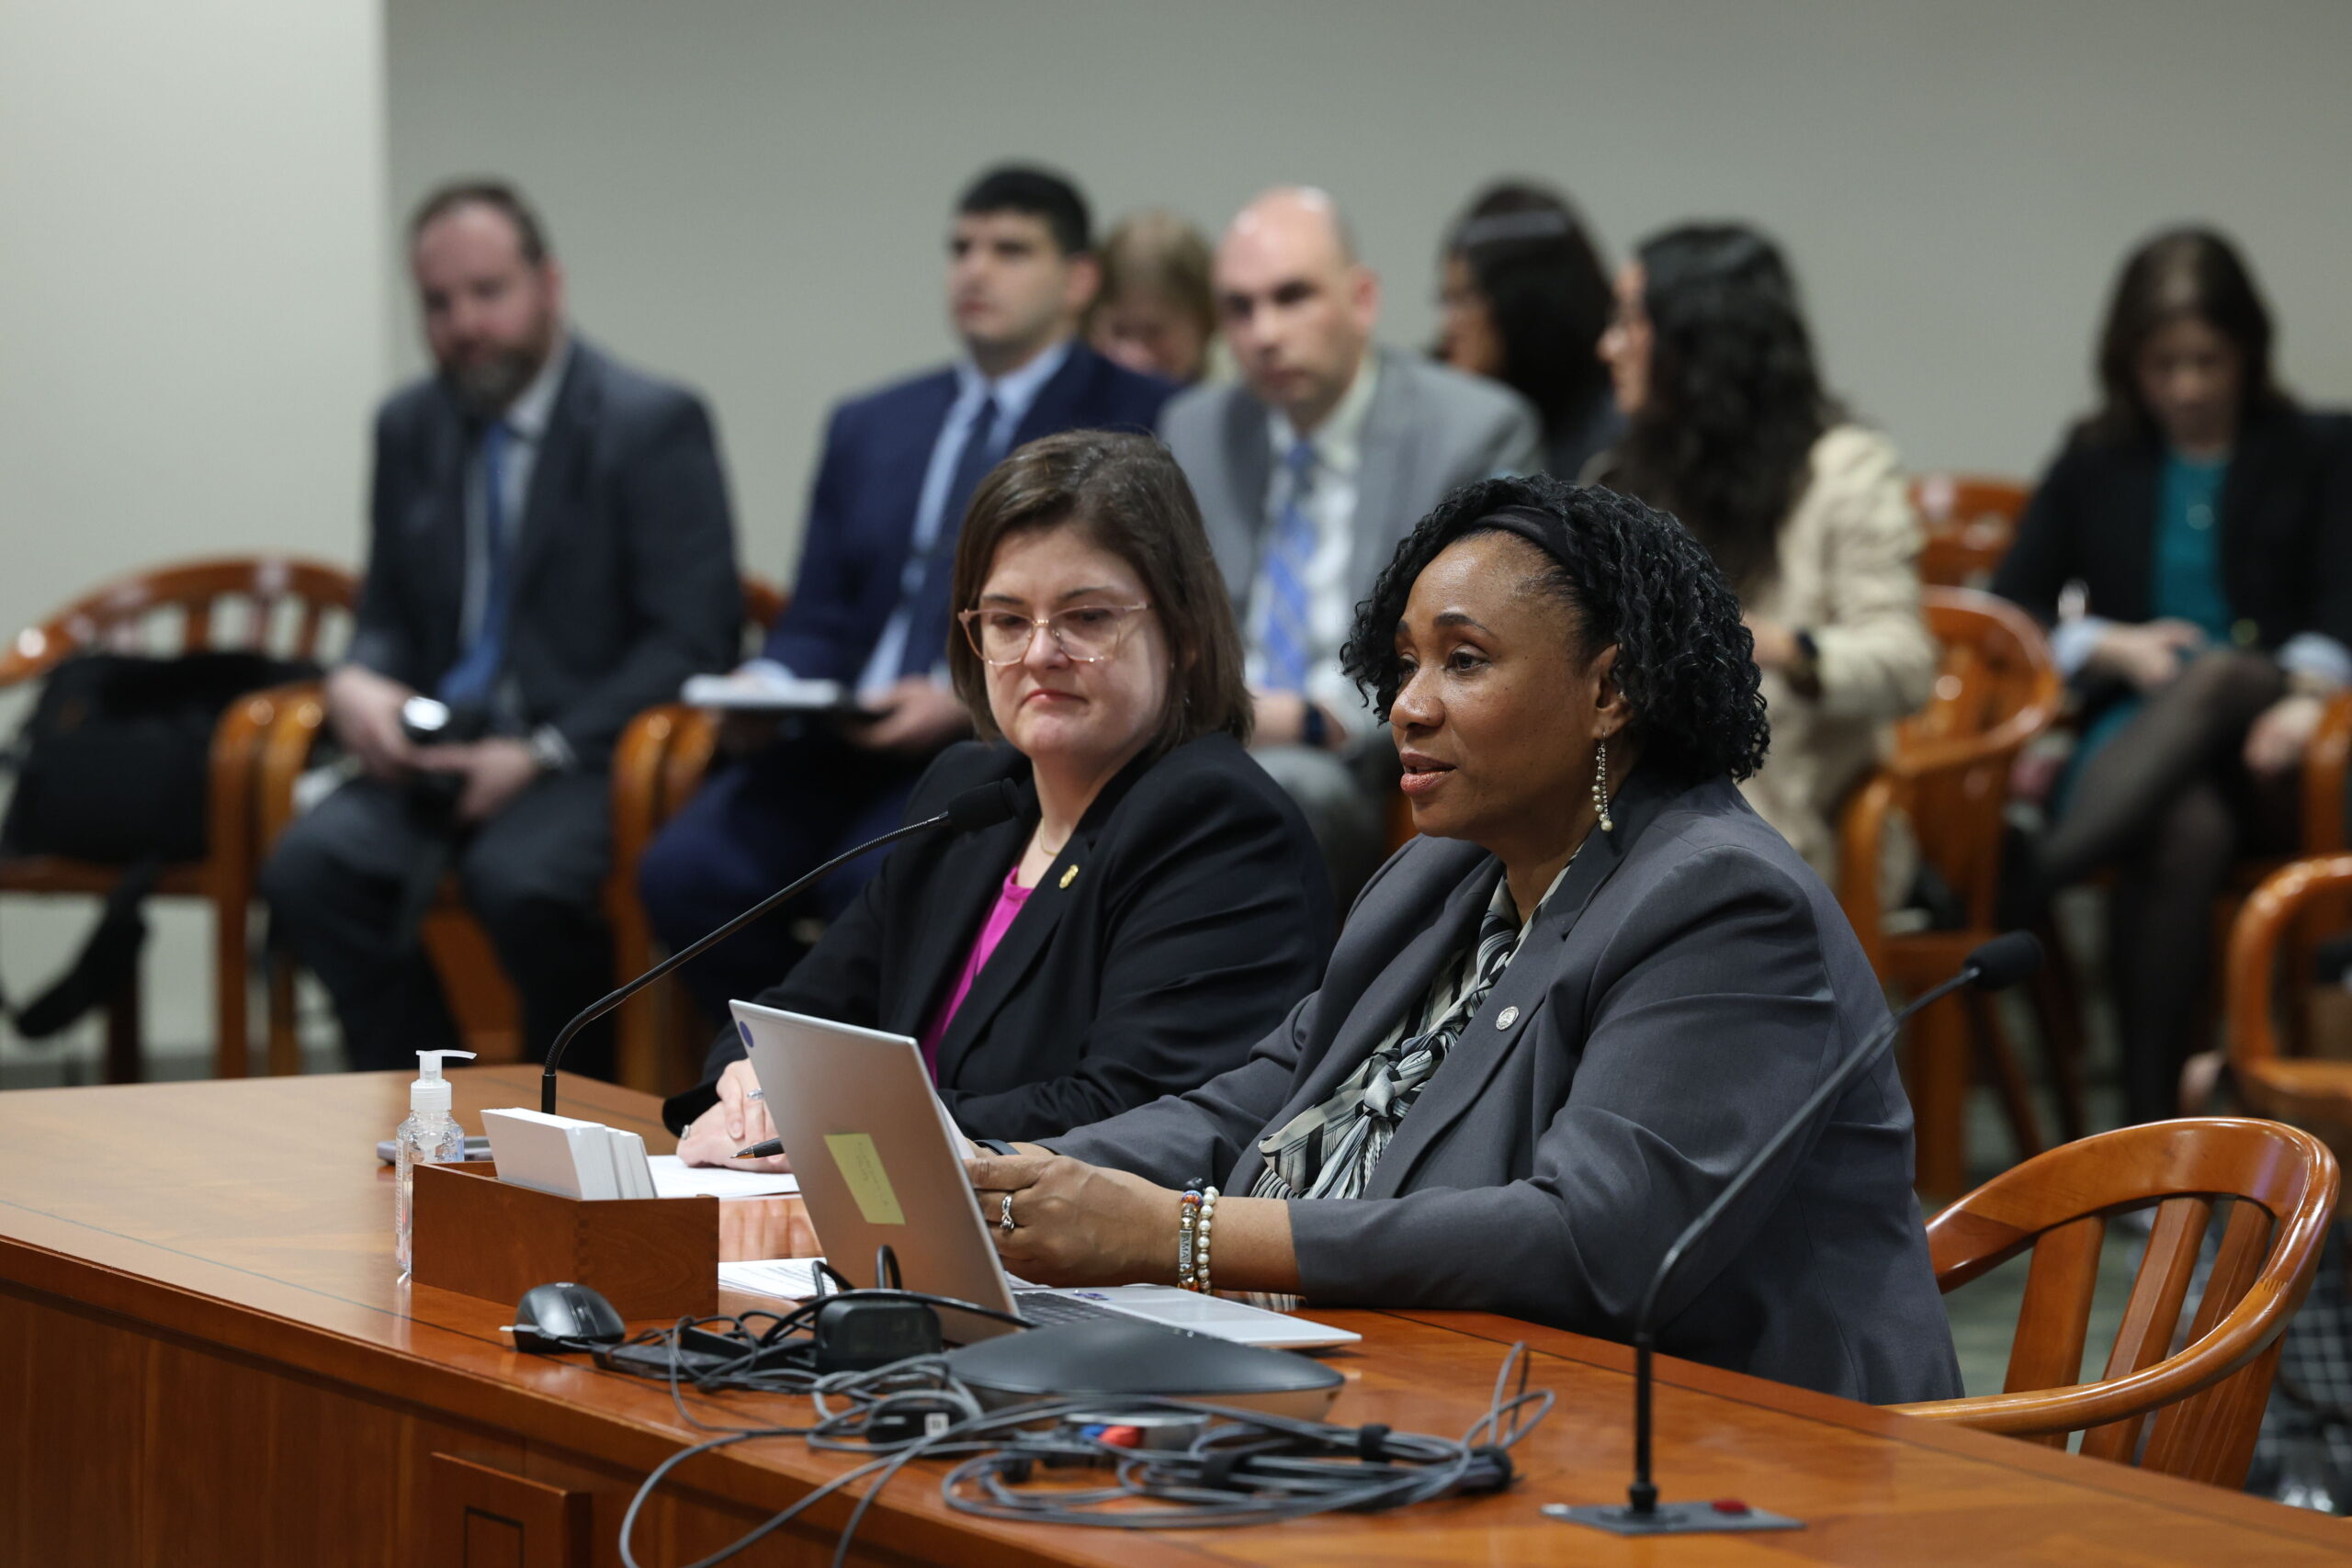 Reps. Young and Hope are seated at a table with microphones, giving testimony in the Health Policy Committee. 